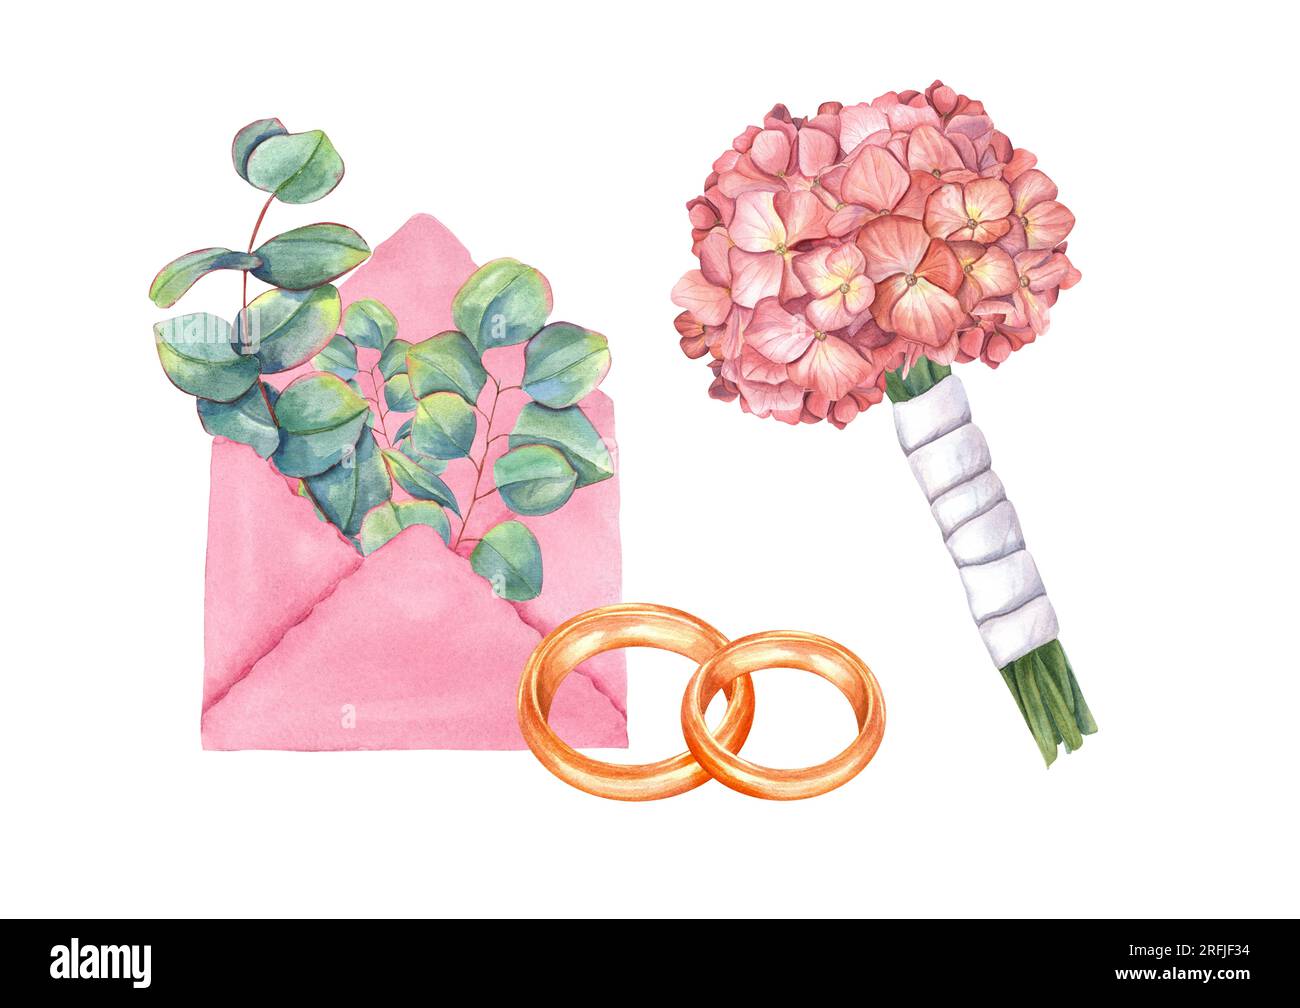 Wedding composition with gold rings, pink envelope, bridal bouquet Wedding rings. Bouquet with hydrangea and eucalyptus. Silver dollar greenery. Stock Photo